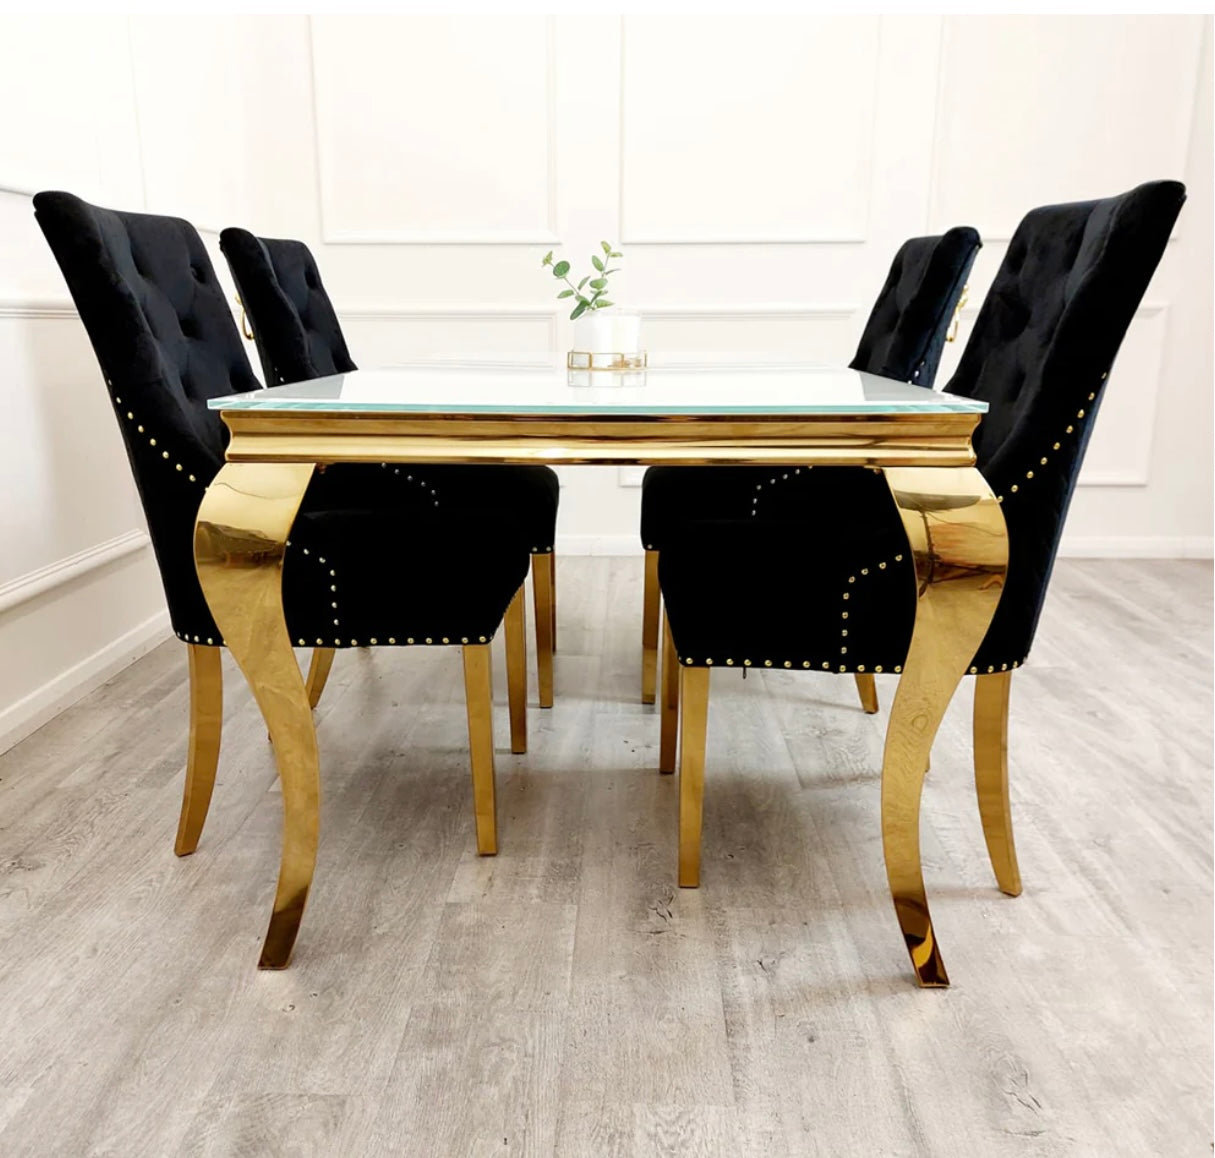 Louis gold white glass dining table with black Bentley chairs